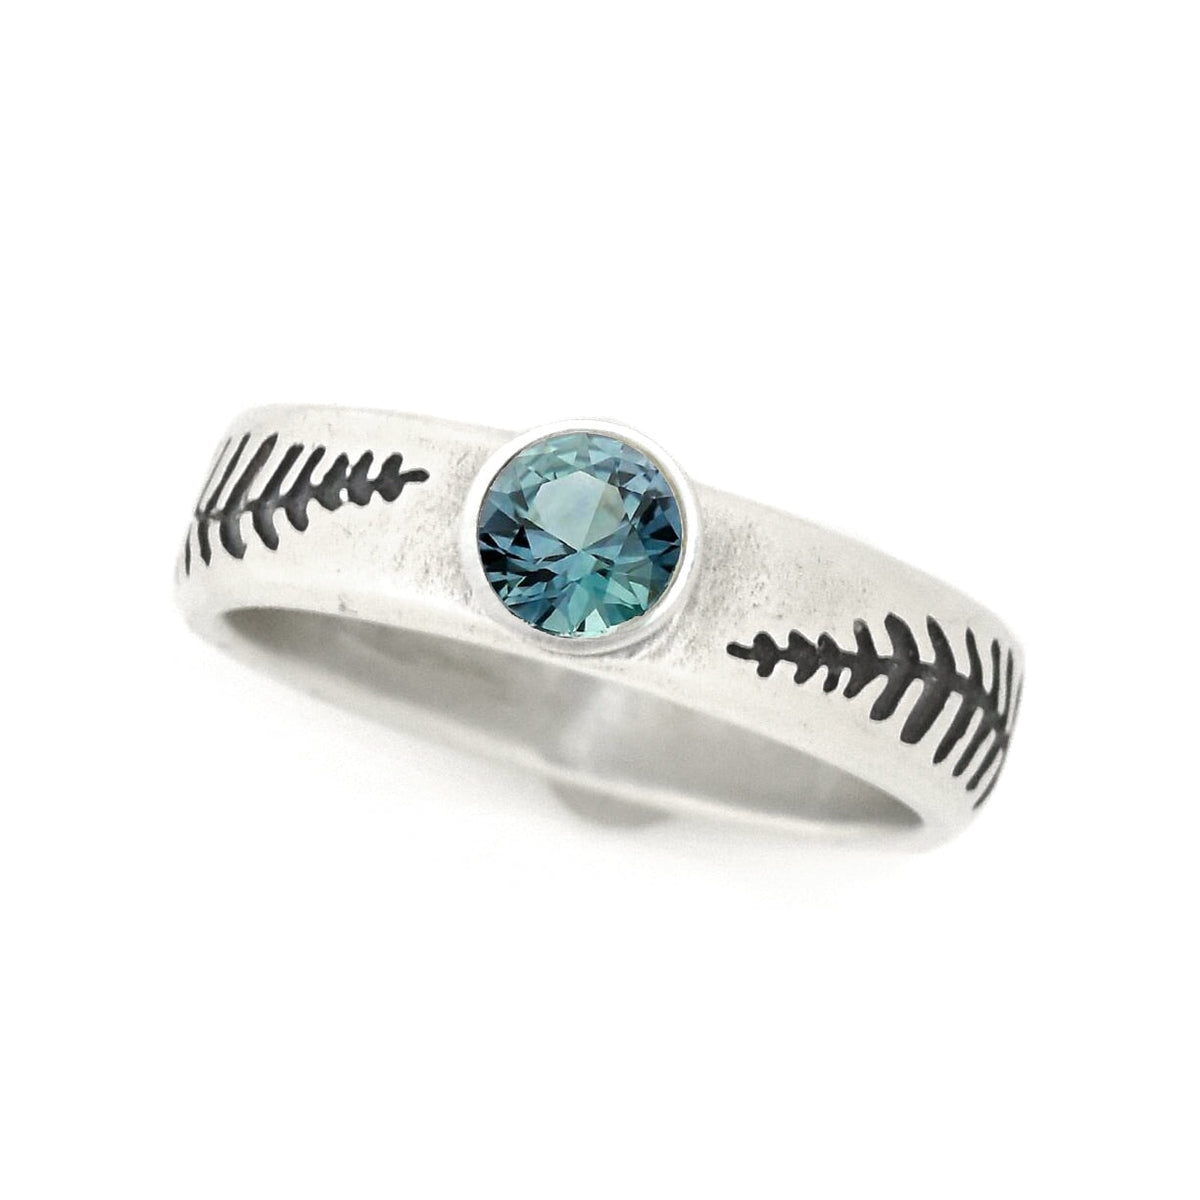 Sparkling Fond Fern Ring - your choice of 5mm stone - Wedding Ring Teal Montana Sapphire Green Montana Sapphire 6982 - handmade by Beth Millner Jewelry